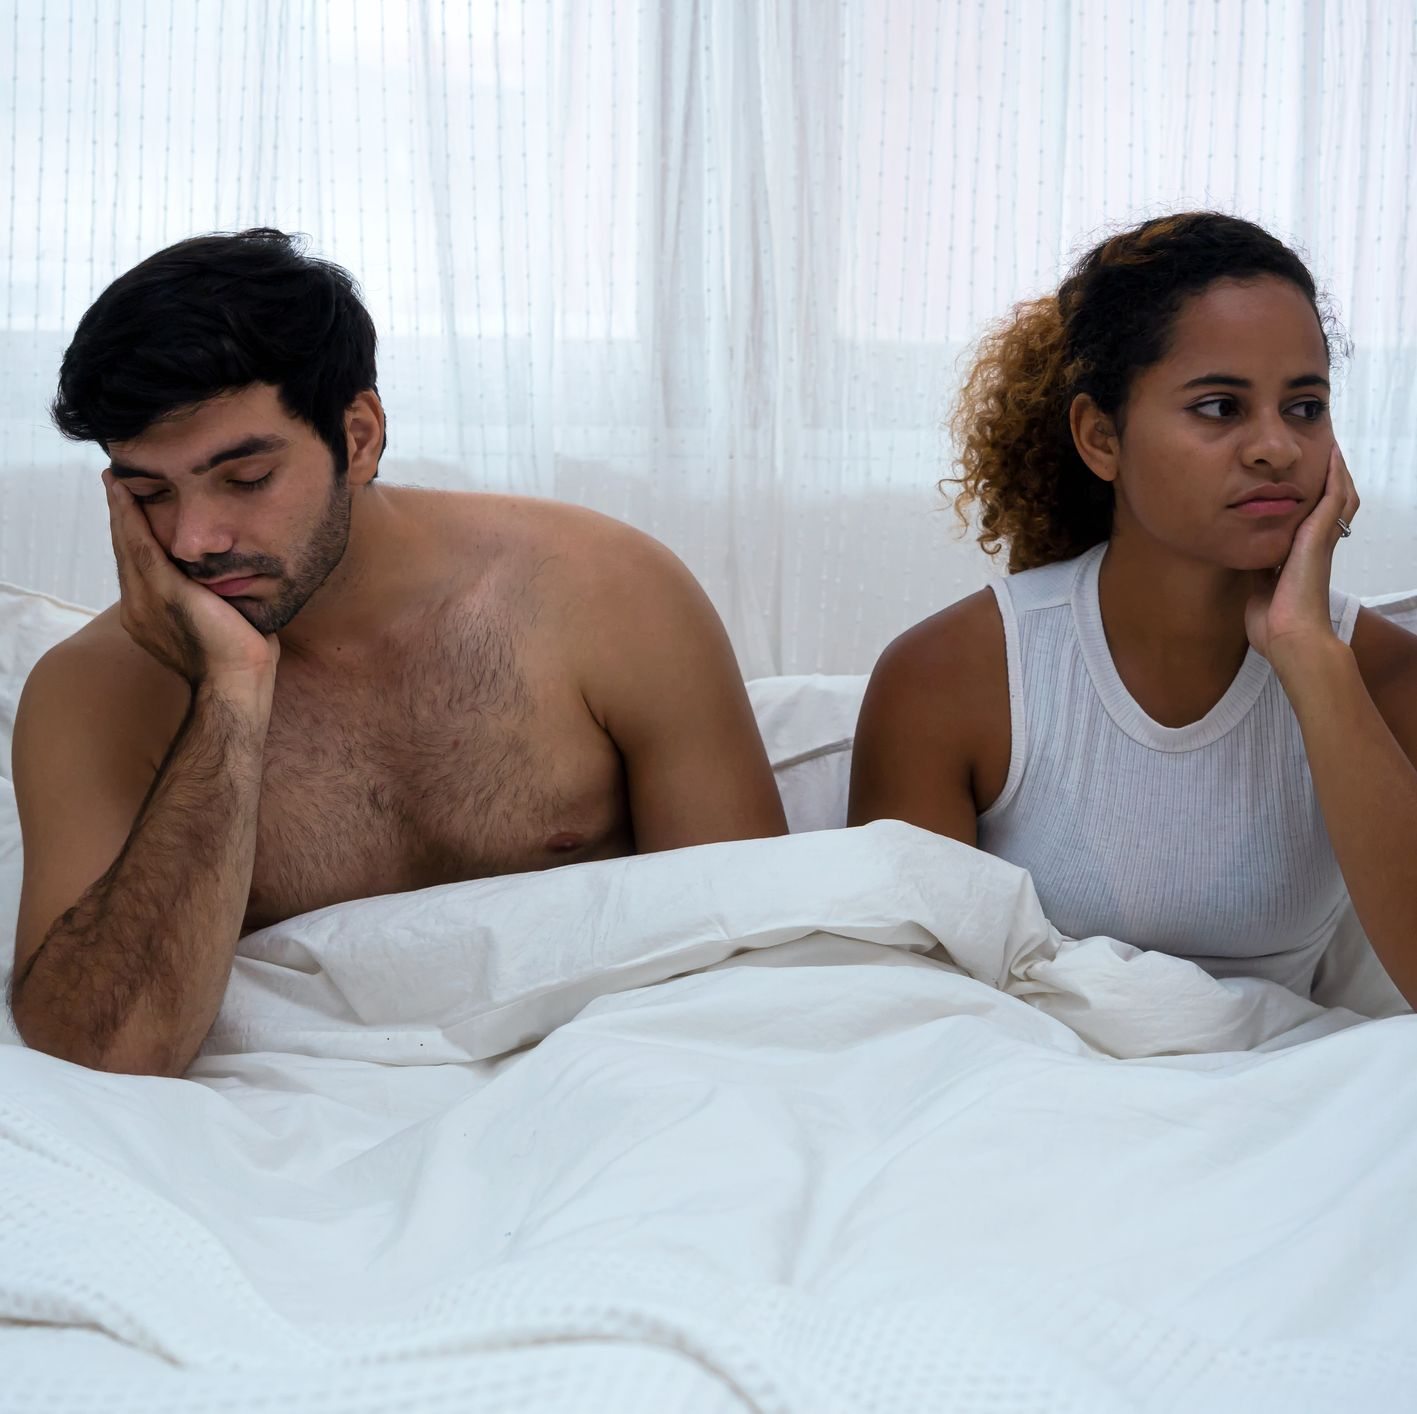 A Urologist Explains How Antidepressants Can Affect Your Sex Life